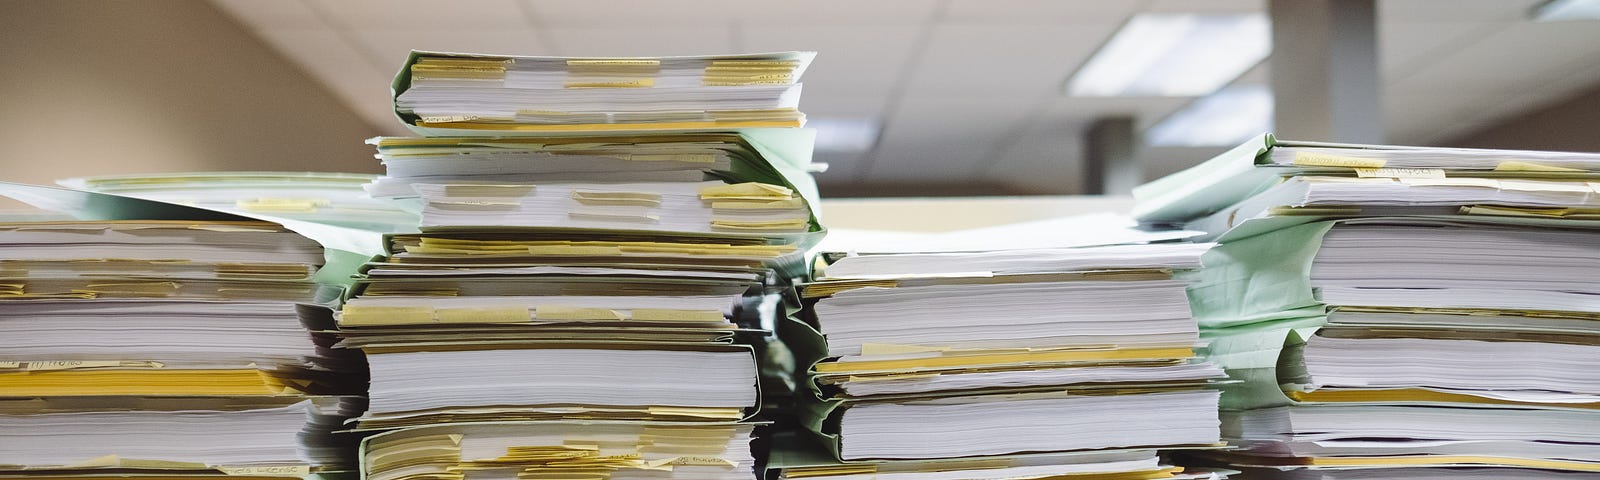 Several tall stacks of paper in folders